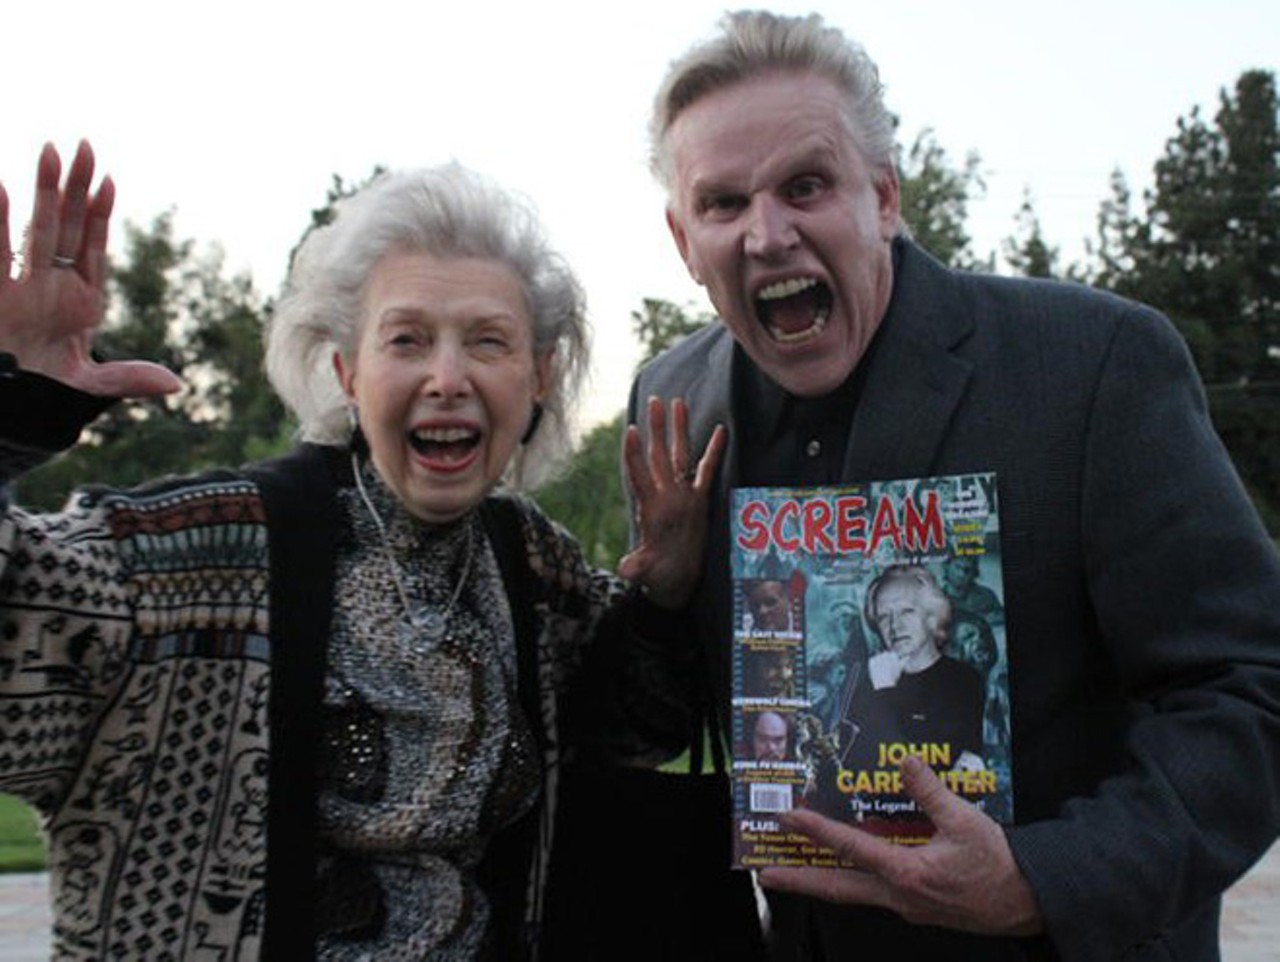 17. Mansion of Blood (2015)
Filmed in Orlando, Fla.
Gary Busey plays a creepy servant alongside 104-year-old Carla Laemmle in the horrifically funny Mansion of Blood. Guests at a mansion fall victim to a witch's curse that spirals out of control which causes all sorts of mischief like revenge killings and monster summonings. What else were you expecting from a Gary Busey movie?